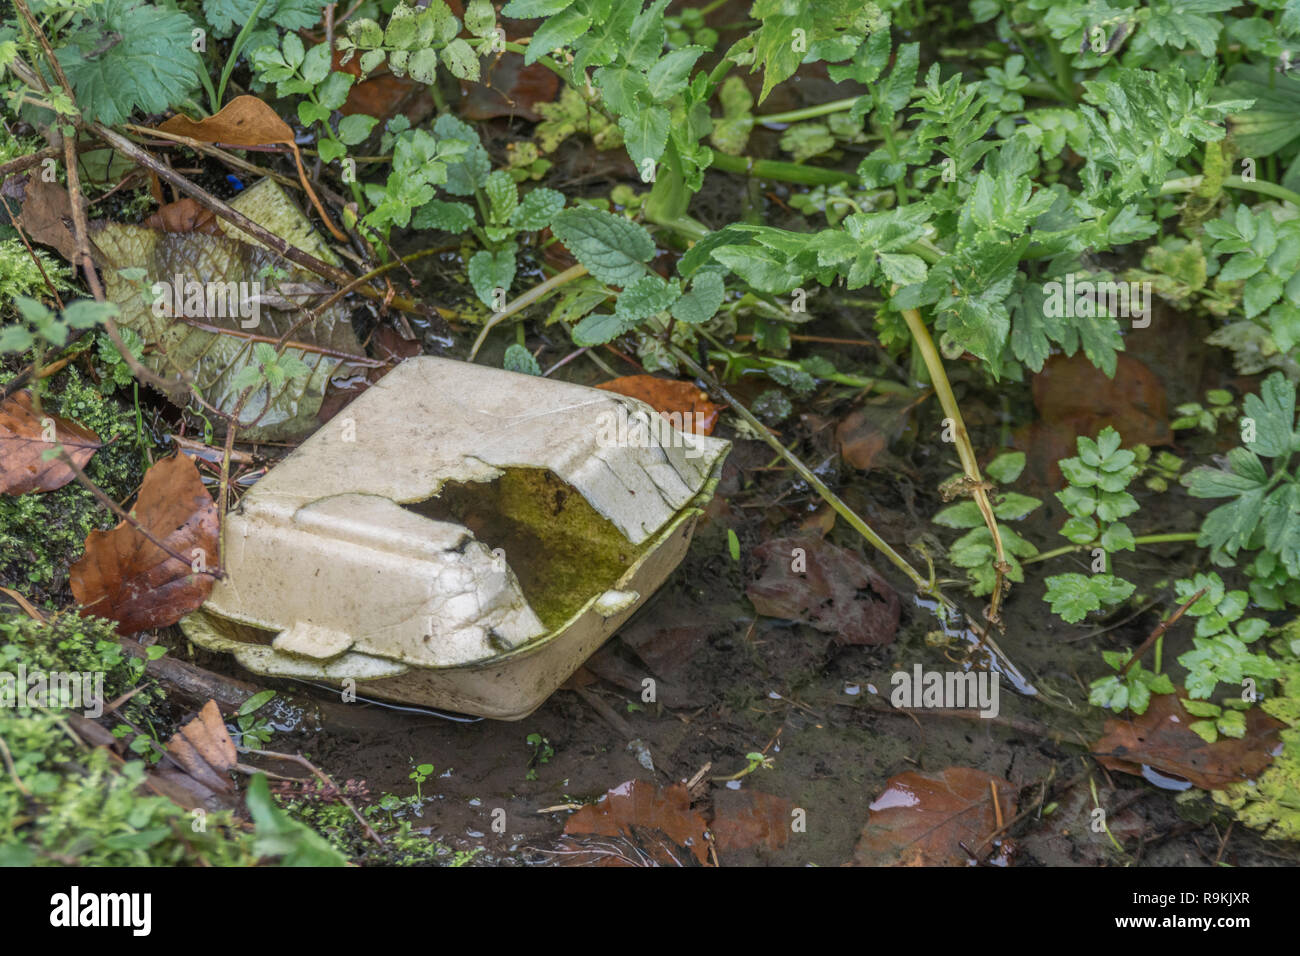 Polystyrene takeaway food box in rural hedgerow ditch. Plastic pollution, takeaway food packaging, environmental pollution, single-use plastic ban. Stock Photo